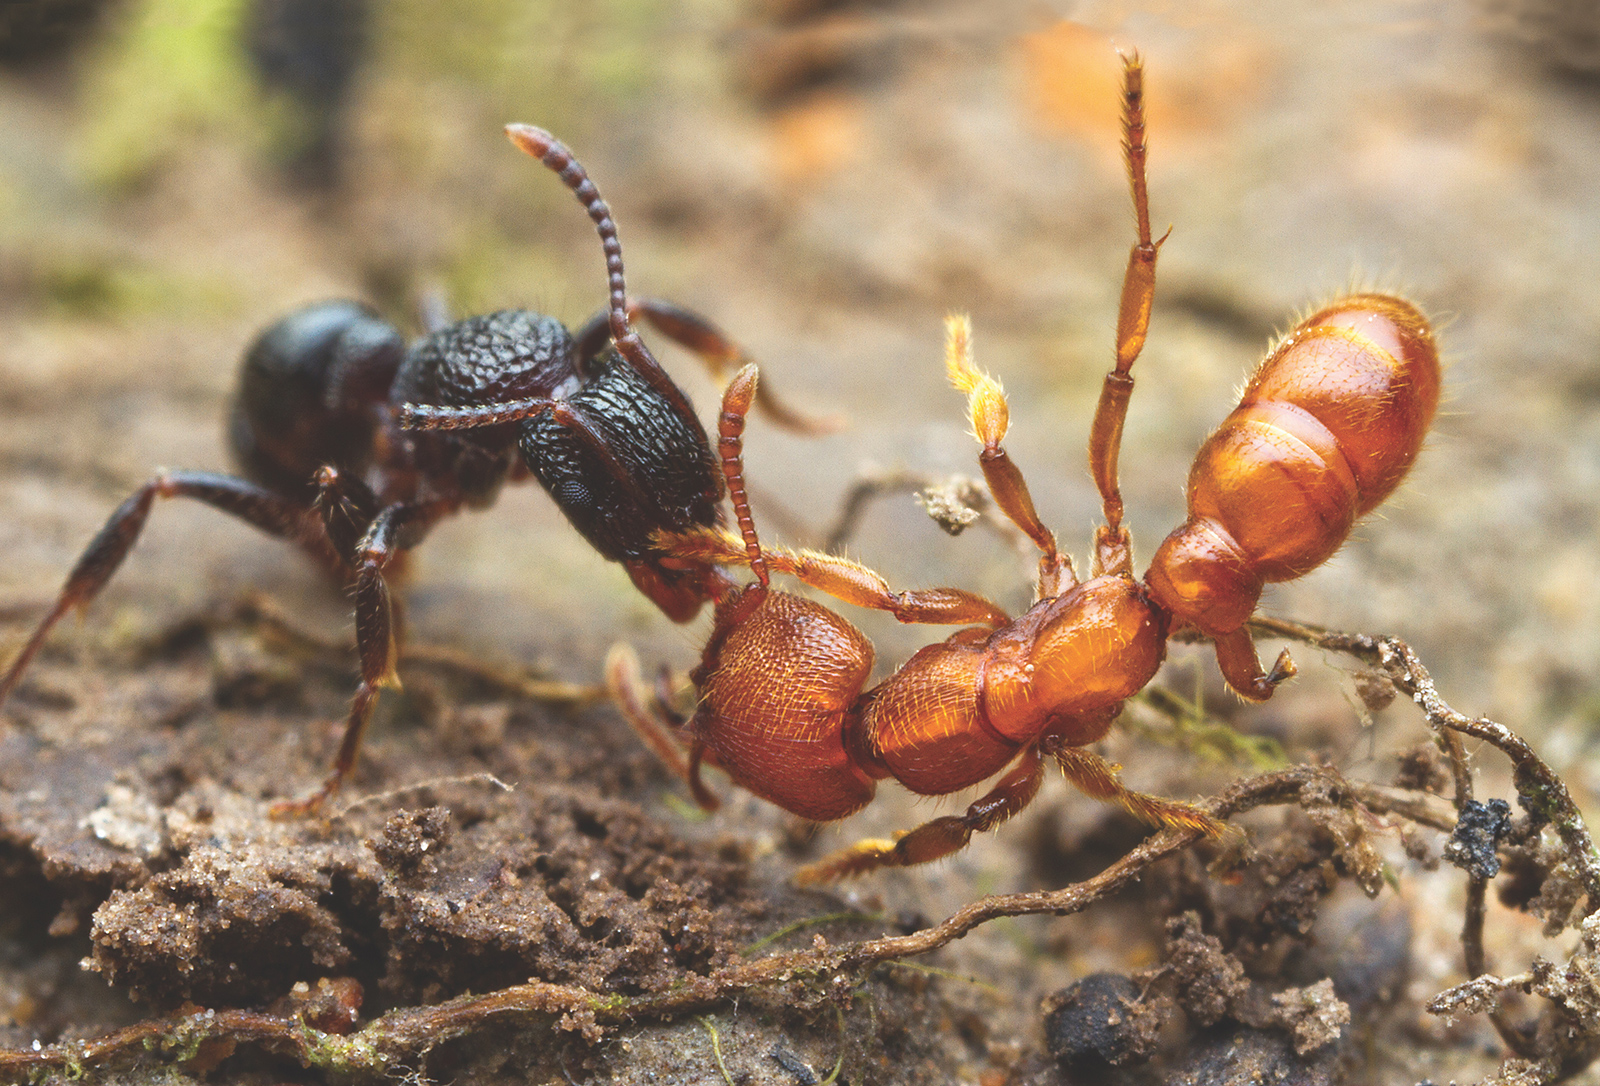 The worst enemies of ants are often other ants. Above, a Rhytidoponera victoriae scout (at left) has discovered an Amblyopone ferruginea worker and attempts to wrestle it back to her nest. Diamond Creek, Victoria, Australia.